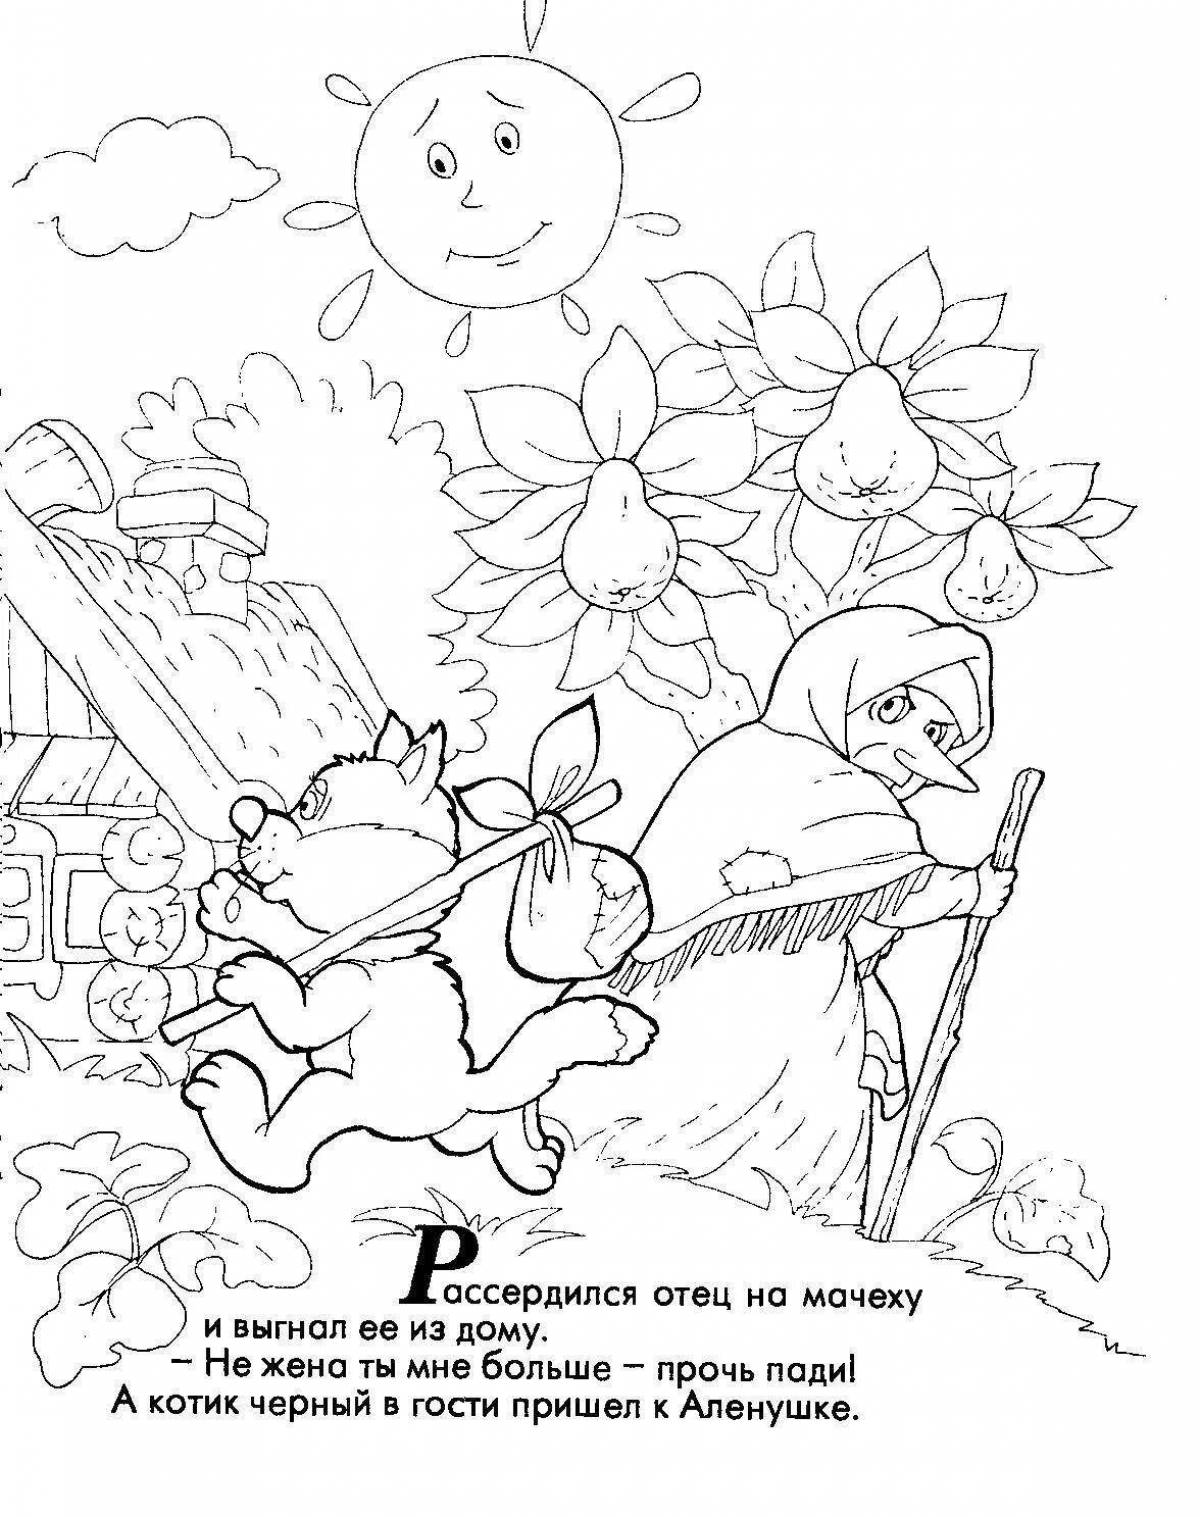 Funny coloring book fear has big eyes for a fairy tale